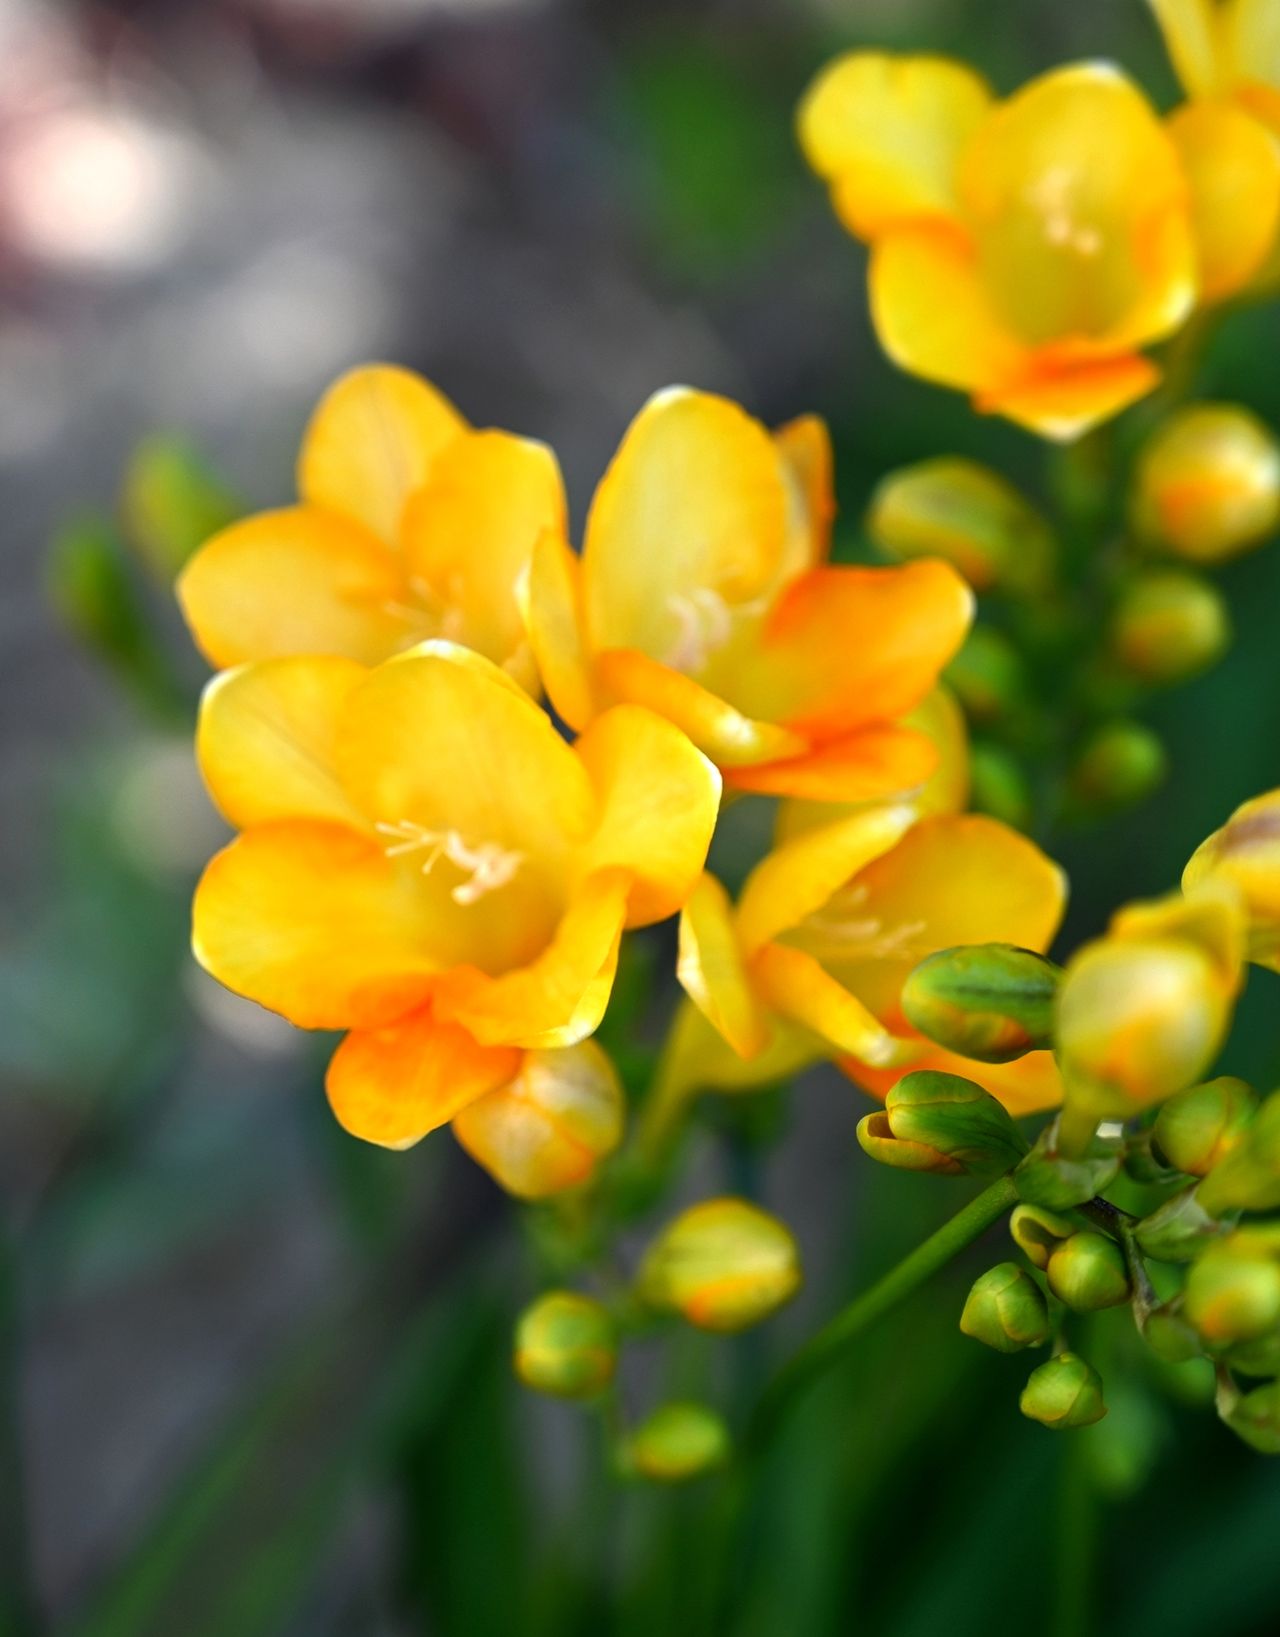 Freesia has a sweet floral, somewhat strong aroma. Its therapeutic healing properties include mind refreshment, enhancing alertness, and strengthening the memory